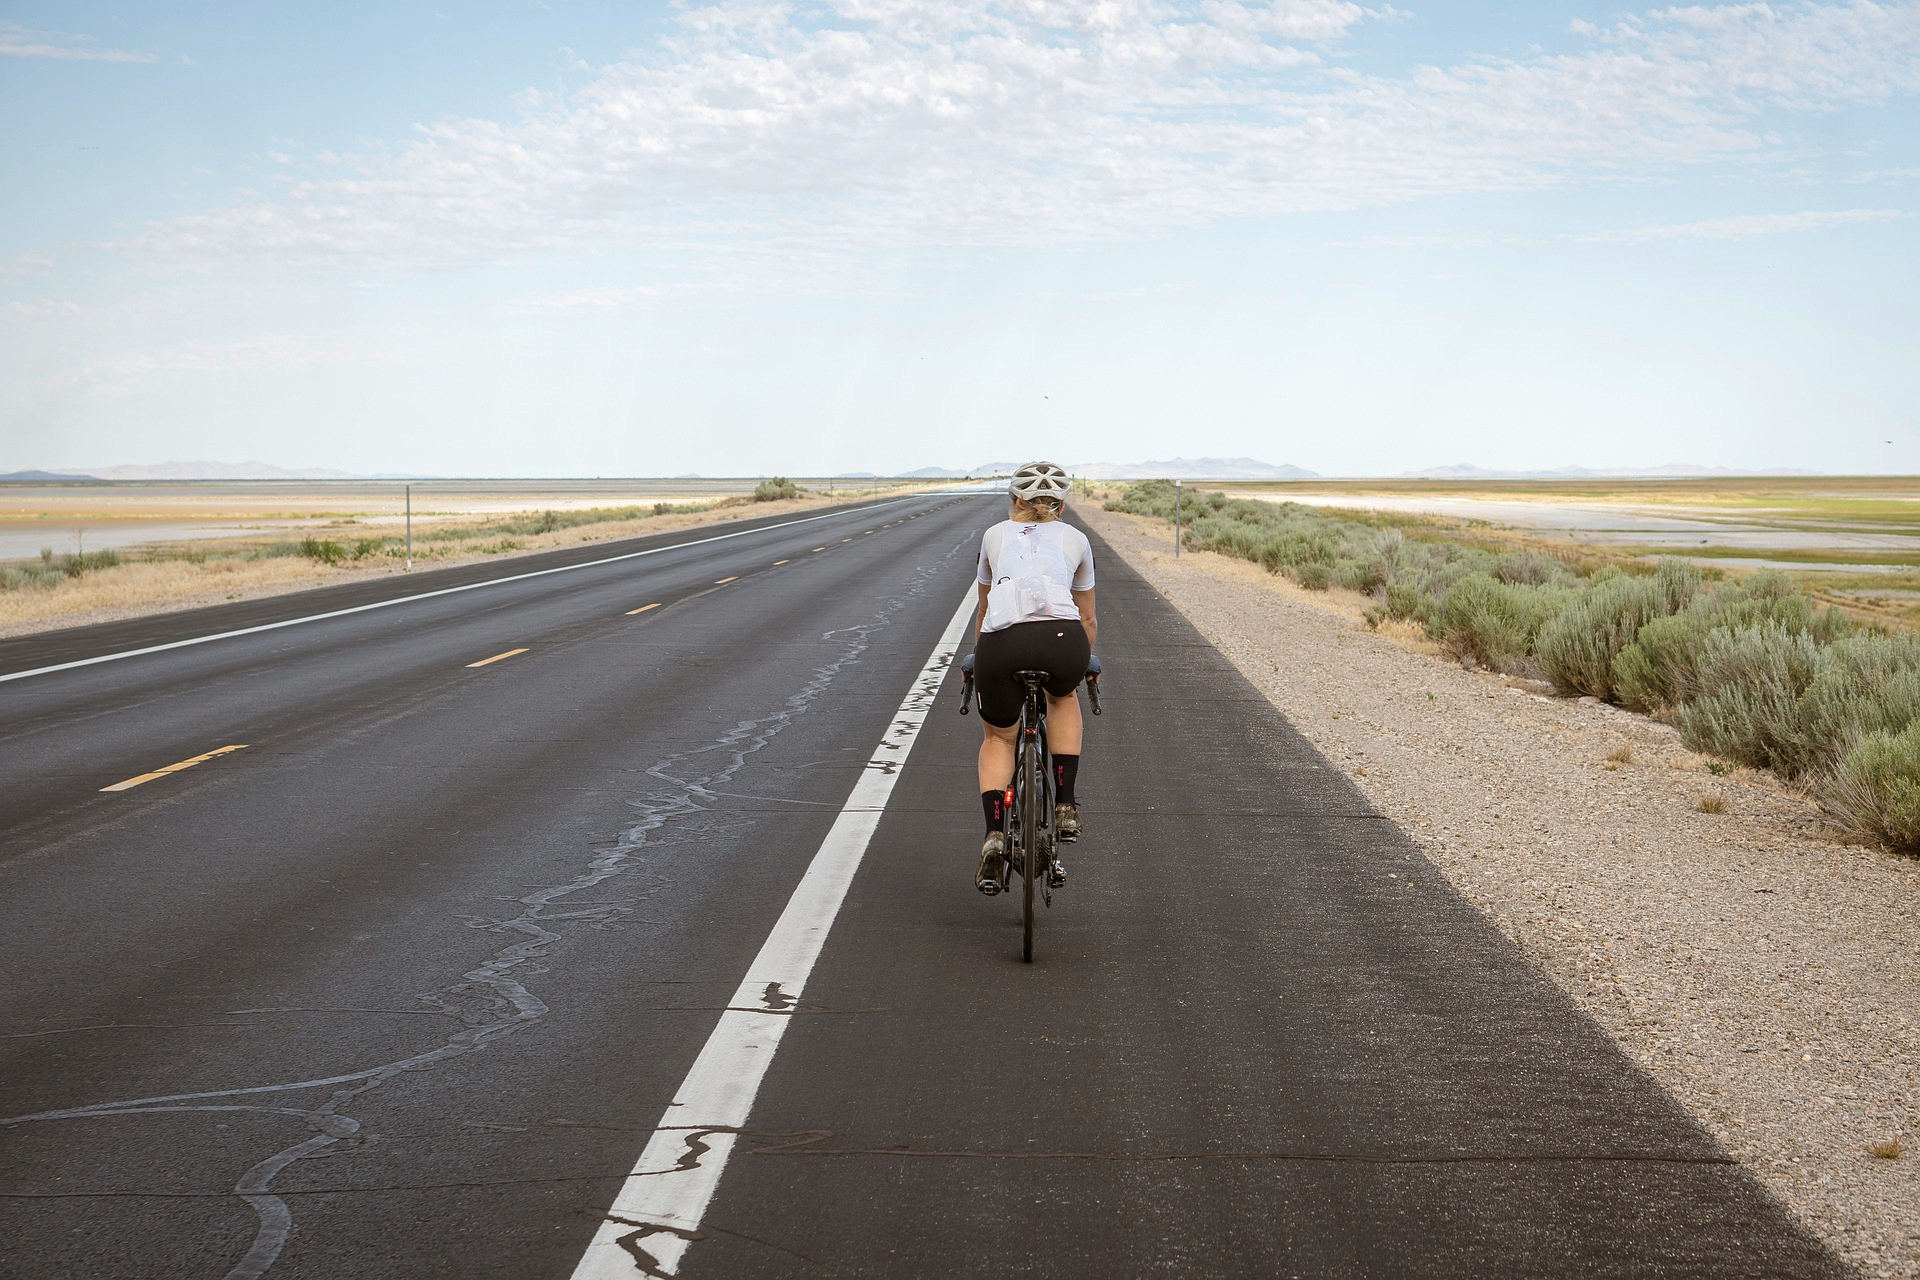 Mature woman from behind riding a bike on a flat road through the desert wearing Herron Apparel cycling shorts and jersey.